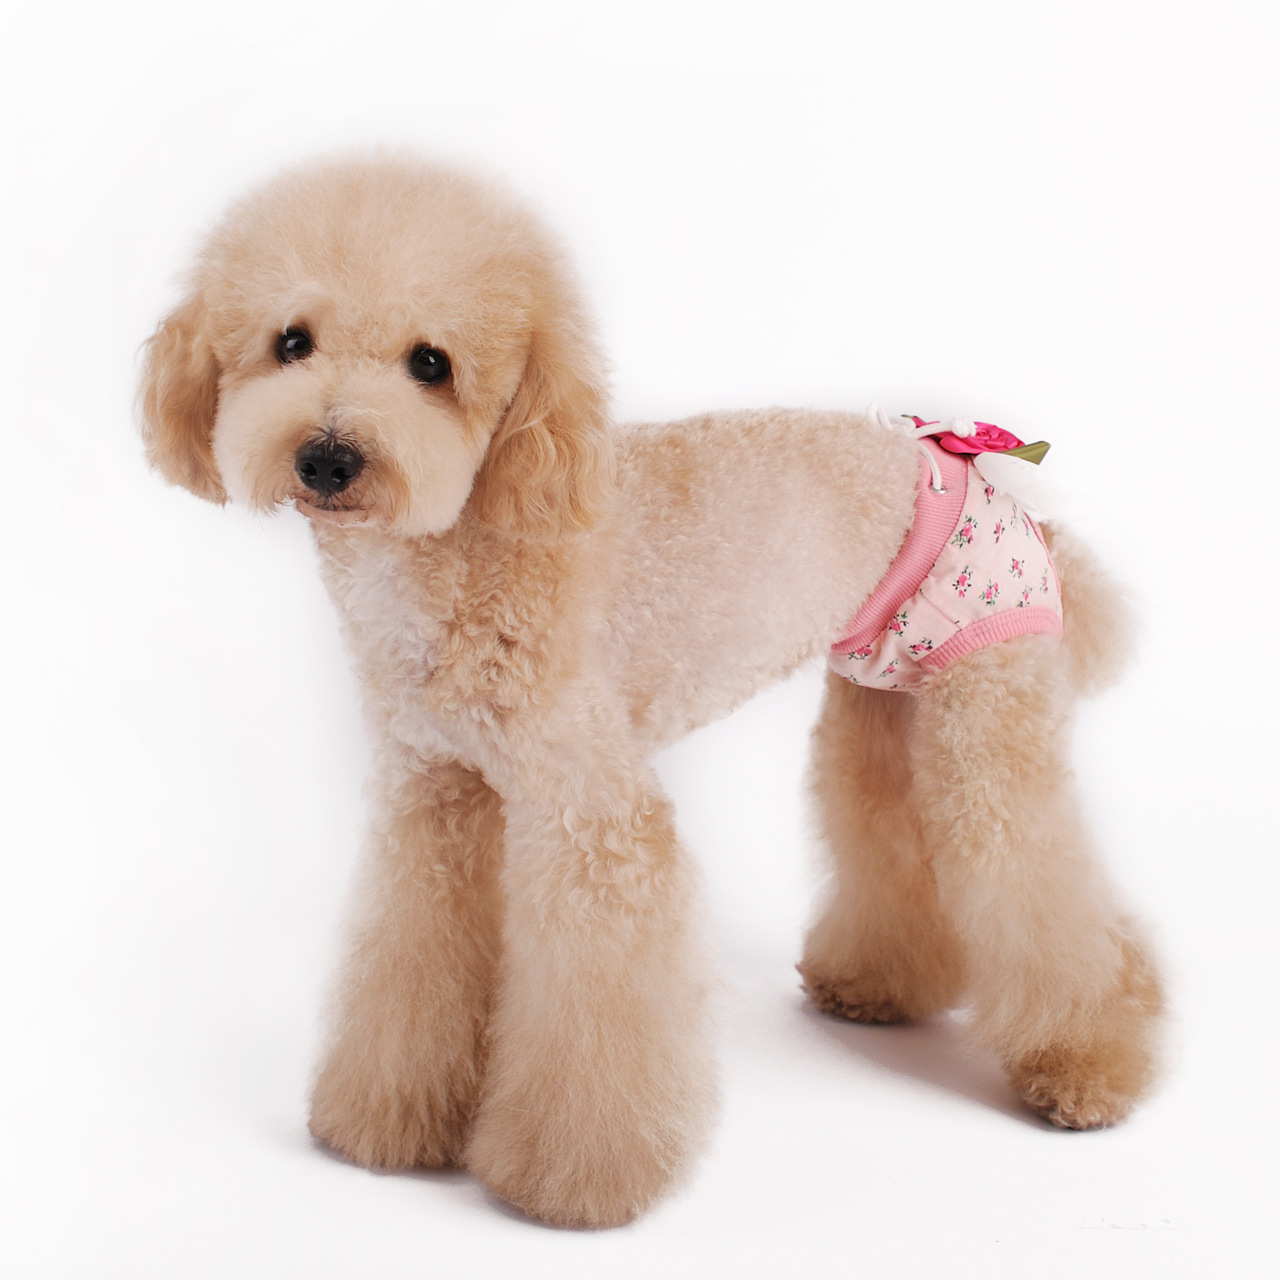 Pet Dog Puppy Female Sanitary Clothes Physiological Shorts Diaper Pink XL